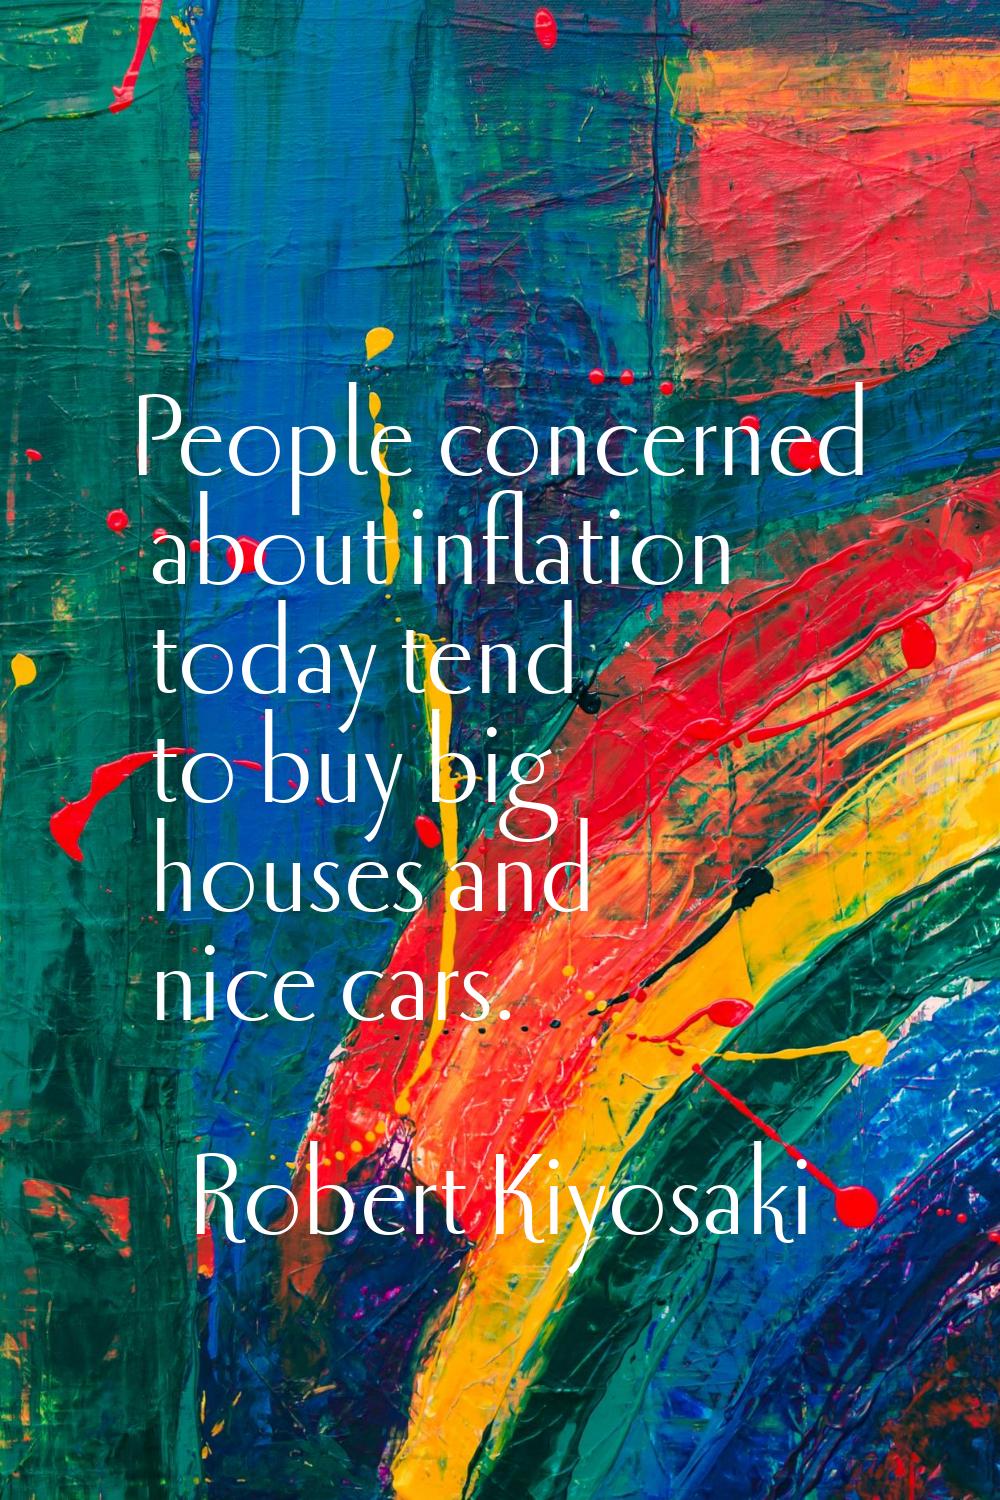 People concerned about inflation today tend to buy big houses and nice cars.